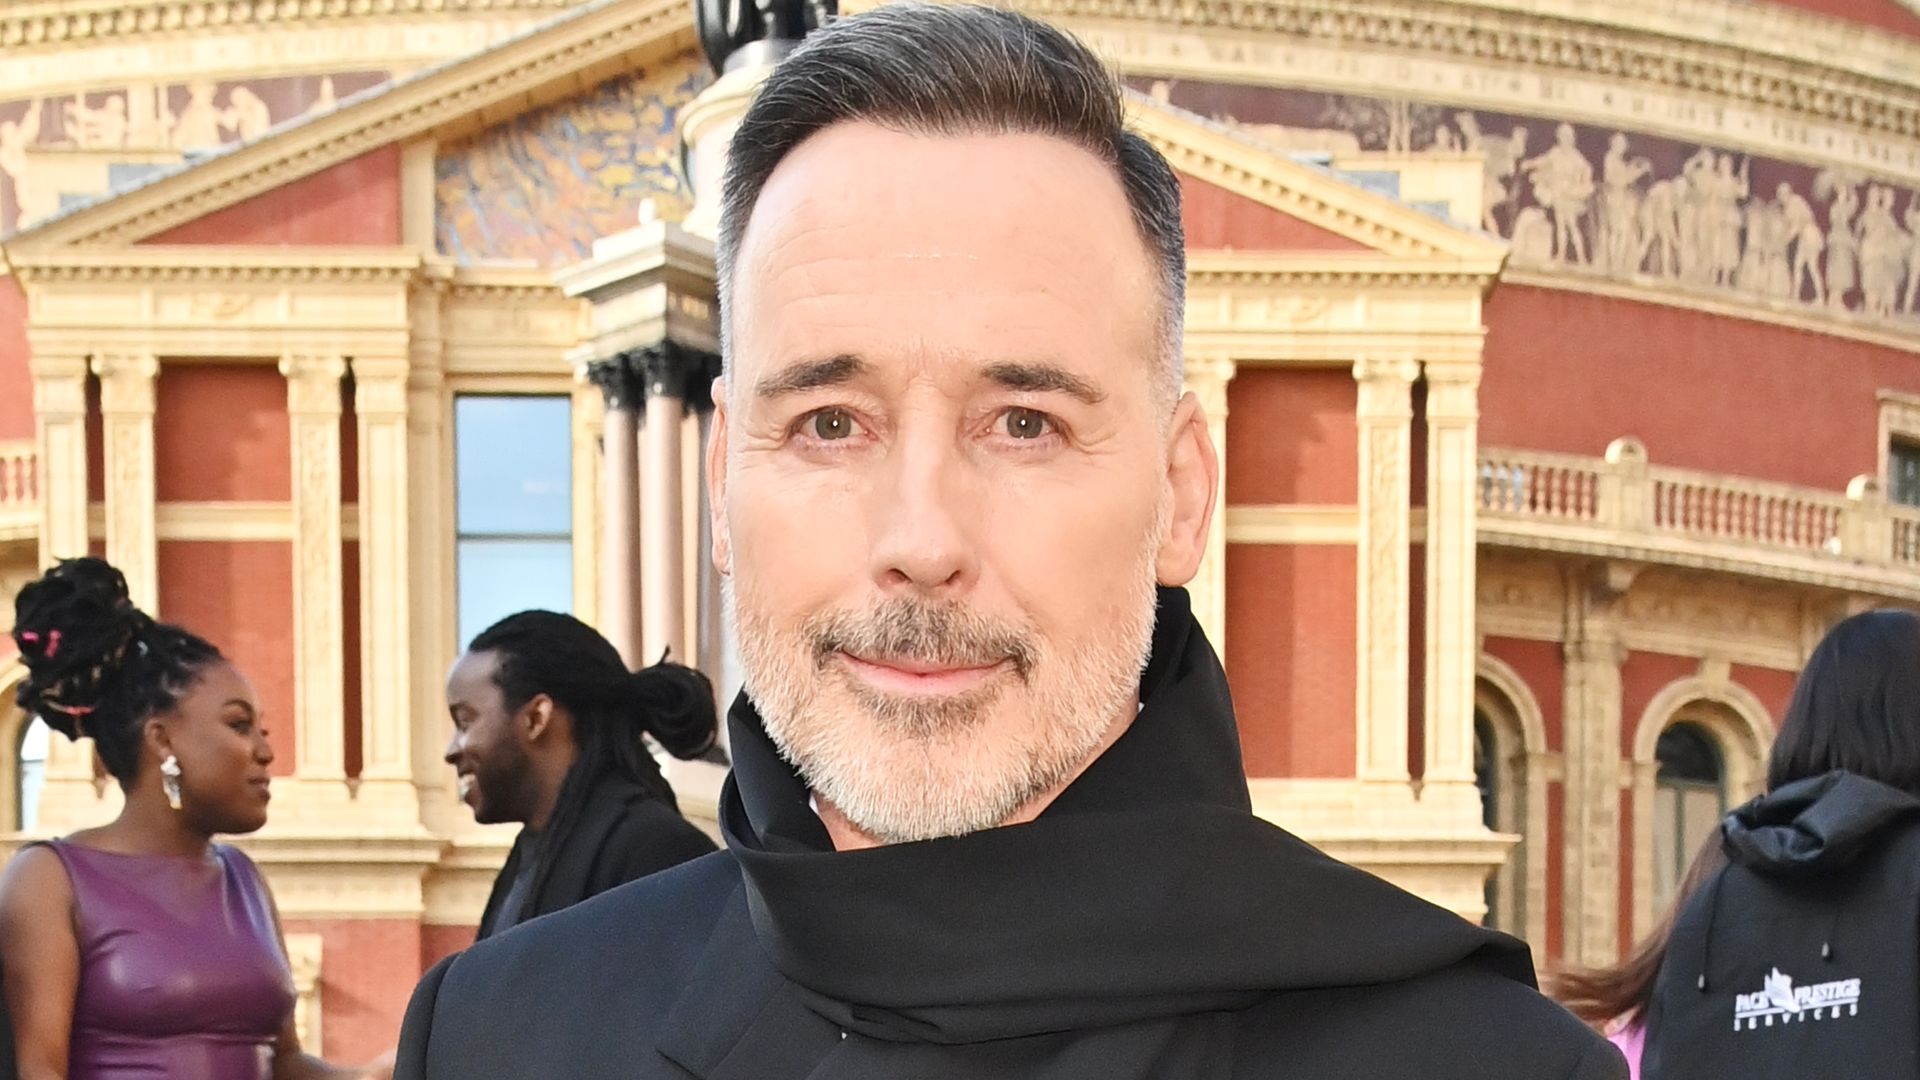 David Furnish smiling posing for a photo on the steps of the Royal Albert Hall